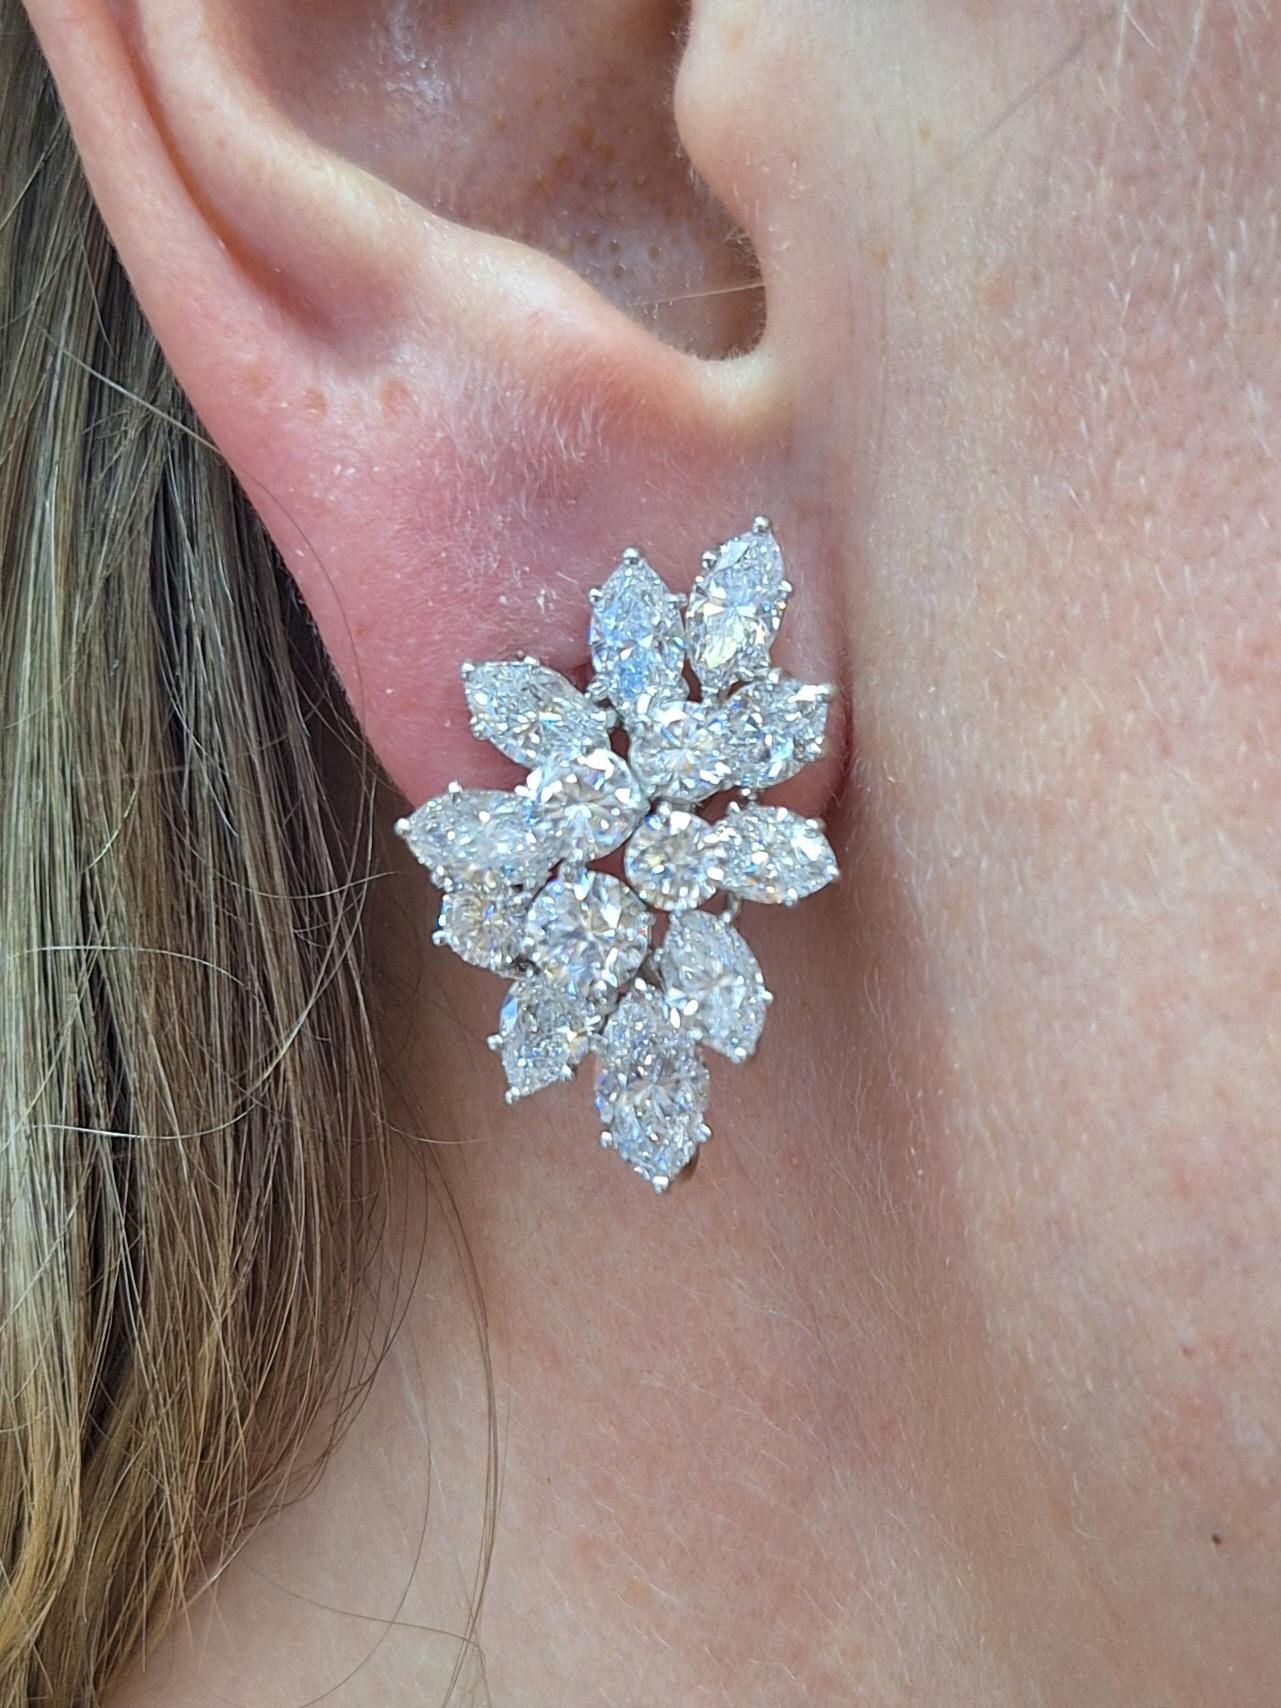 Harry Winston Mixed Cut Cluster Diamond Earrings


Total Carat Weight: Approx. 14.48Ctw


Metal: 18Kt Yellow Gold


Diamond Color: E-F


Diamond Clarity: VVS1


Length: 1.25 Inch long

 

Weight: 17 Grams